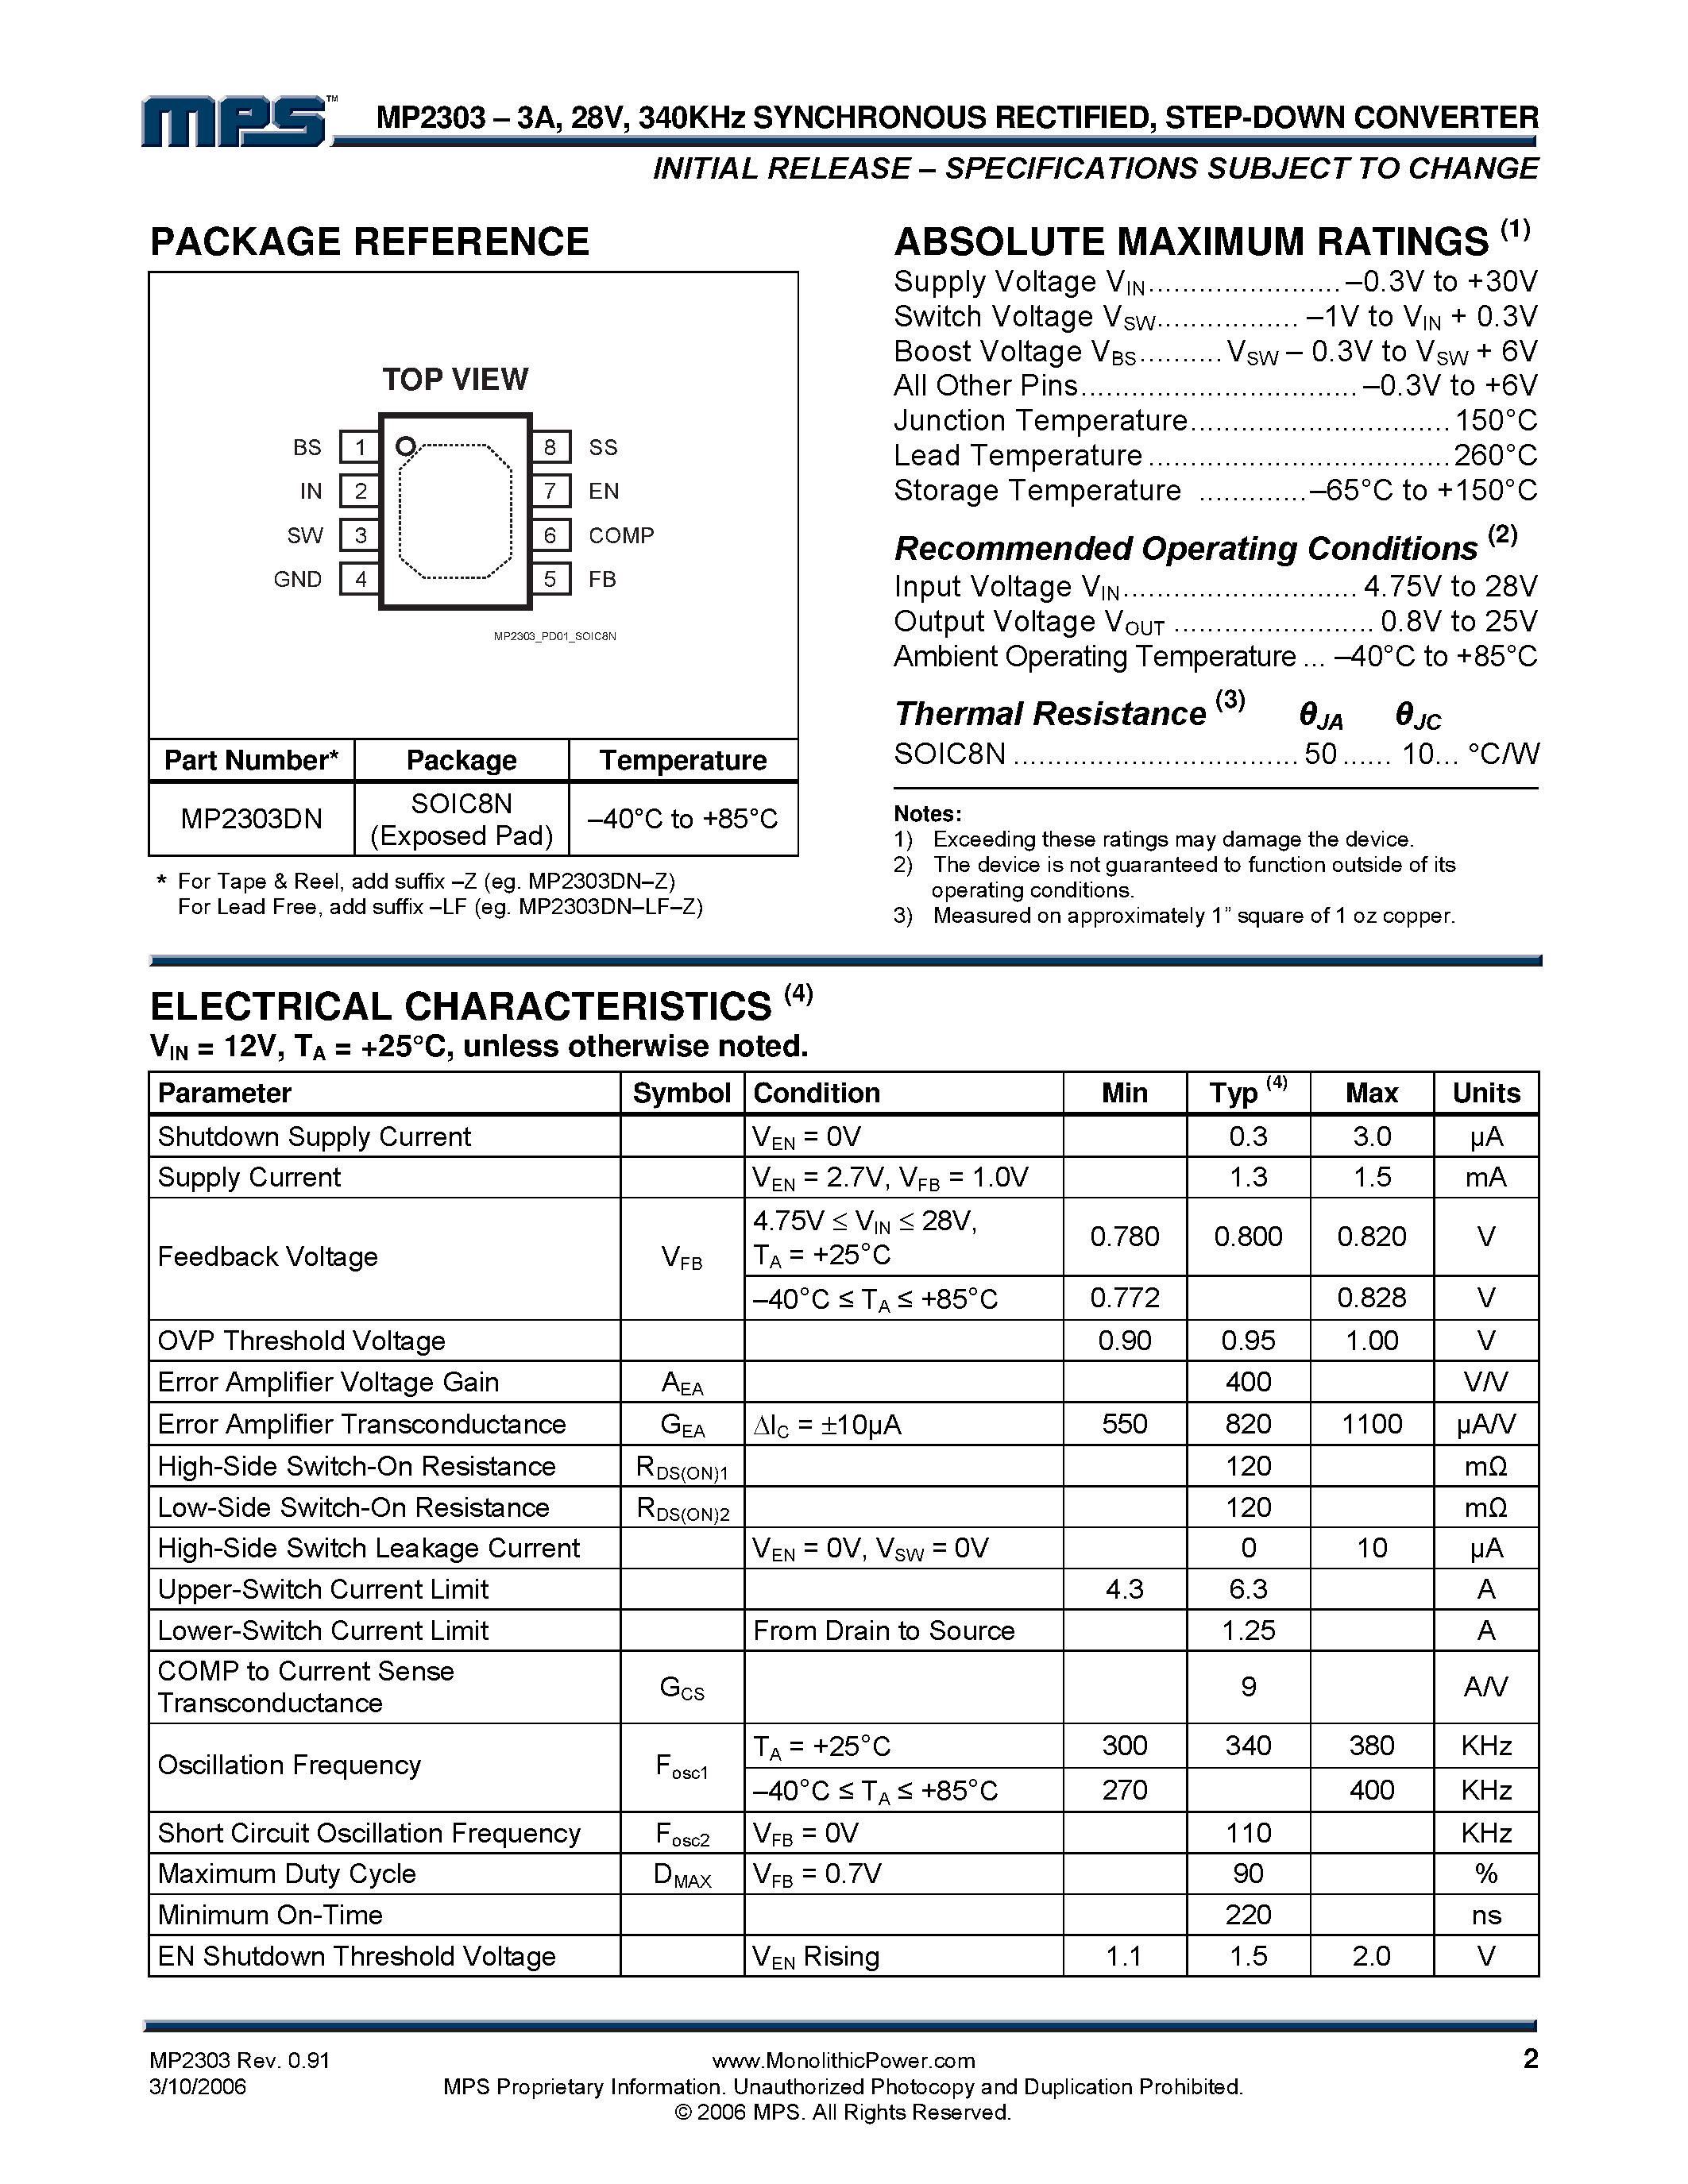 Datasheet MP2303 - 340KHz Synchronous Rectified Step-Down Converter page 2